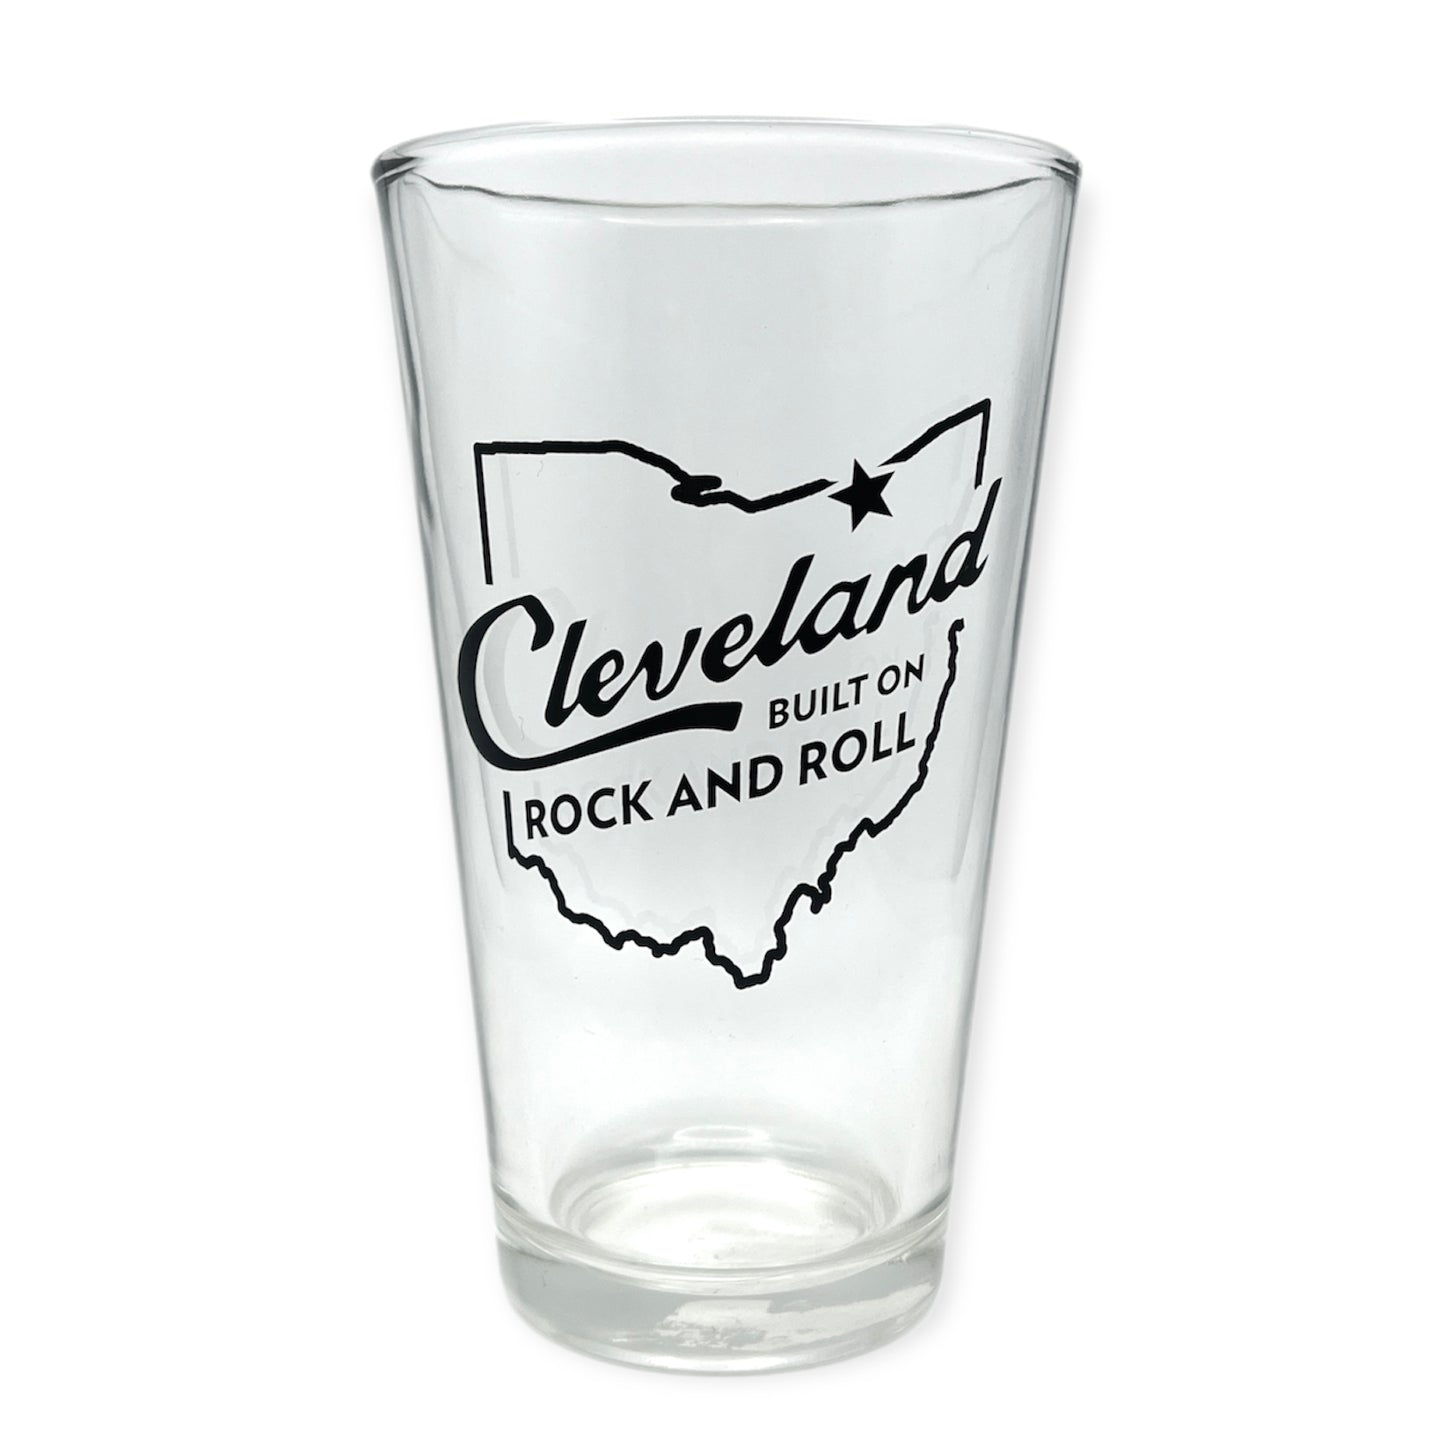 ROCK HALL CLEVELAND BUILT ON ROCK AND ROLL PINT GLASS